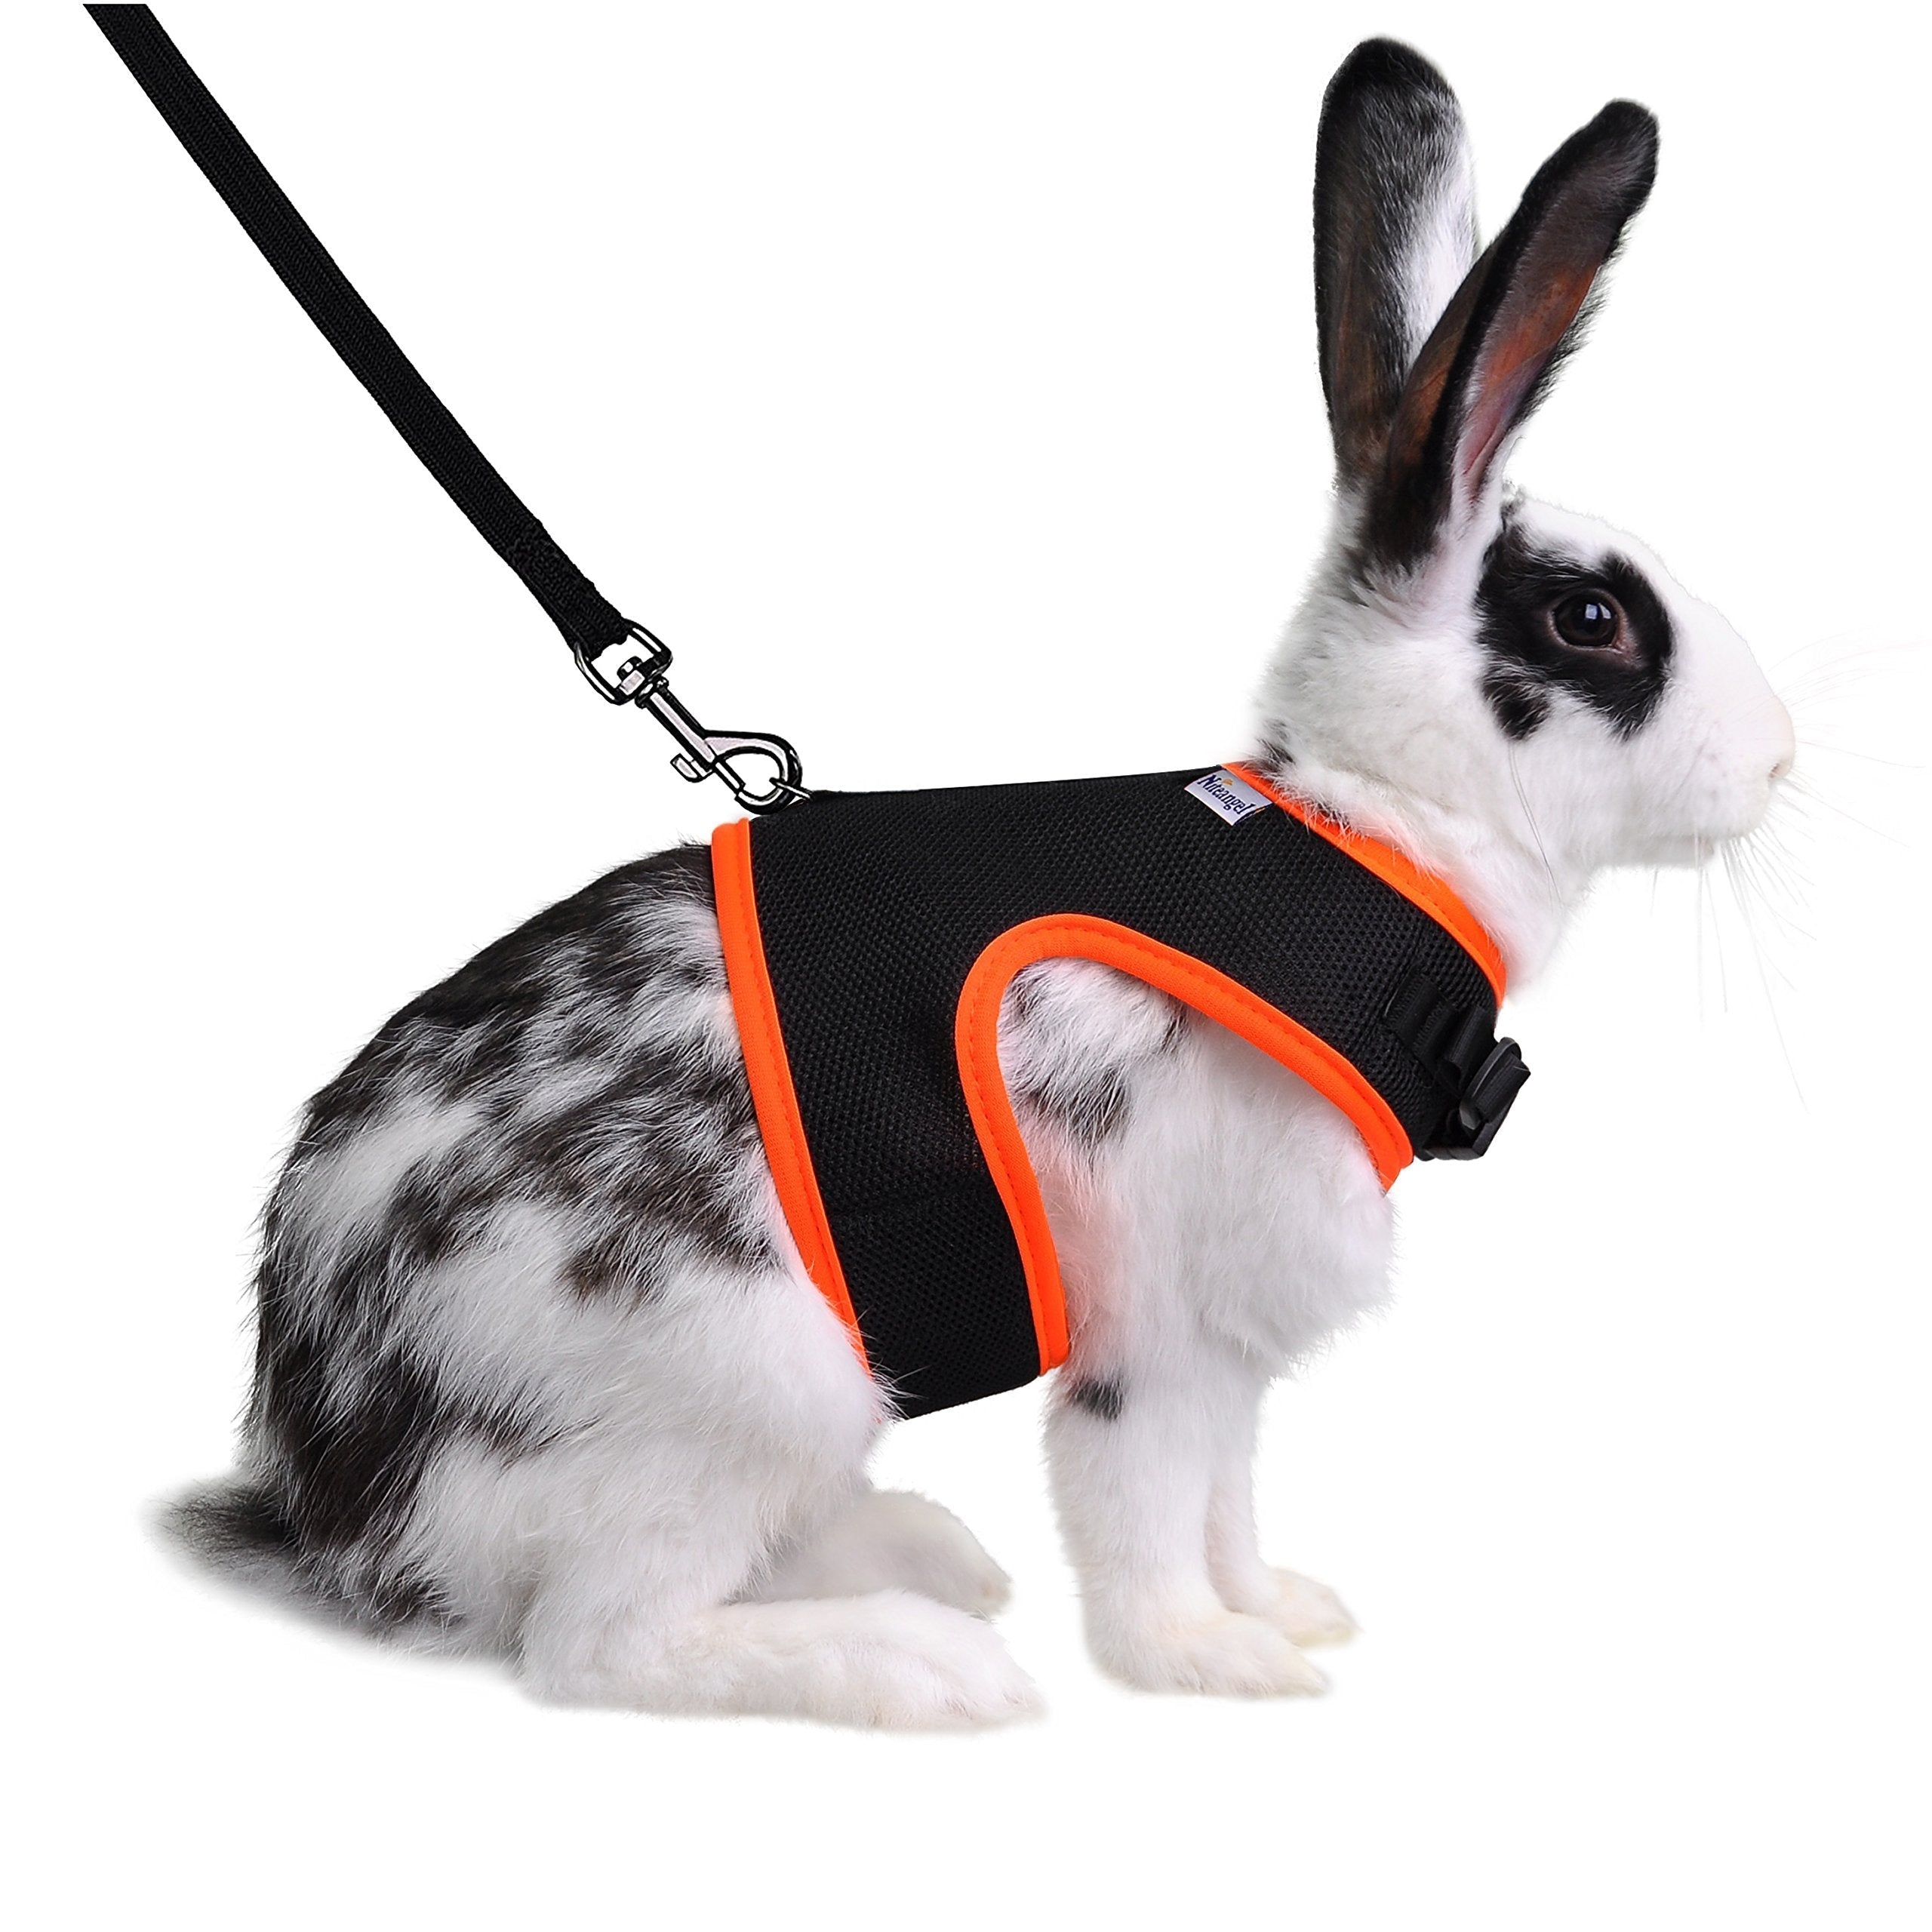 Niteangel 2-Pack Adjustable Cat Harness With Leash Review